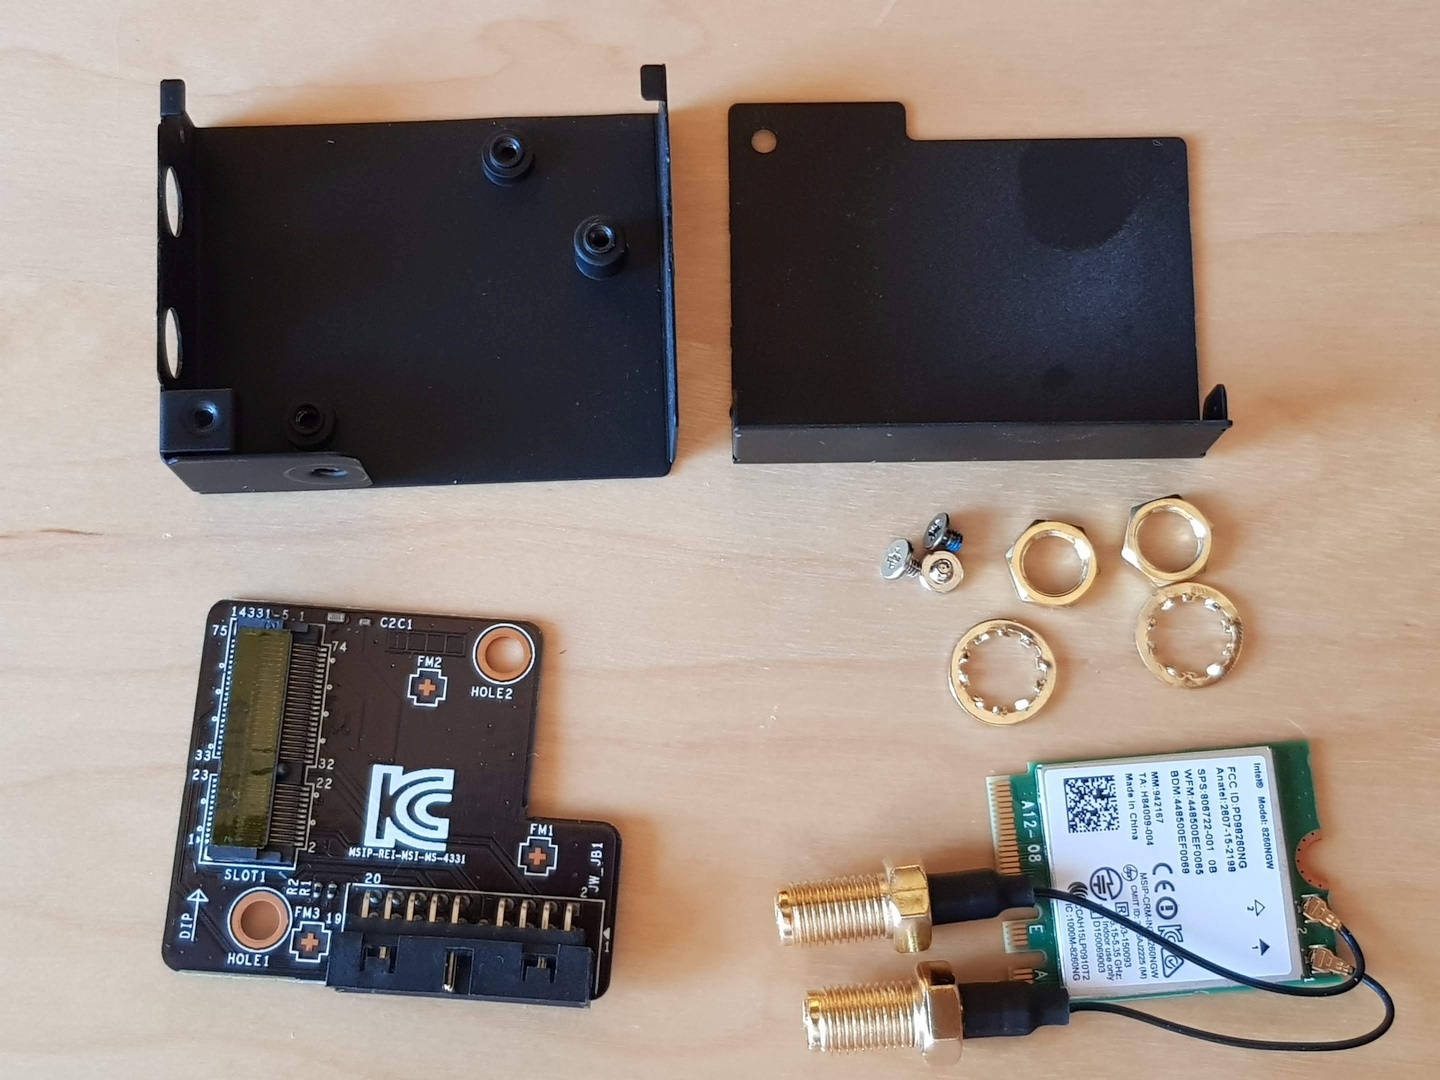 The whole WiFi/Bluetooth module disassembled. On the top of the photo there are two parts of the metal cover. On the bottom left side of the image there's the adapter – it has only the connectors and two resistors on it. The M.2 connector is missing – per description on the silk mask – pins from 24 to 31. On the right bottom side of the image there's a set of screws and the WiFi/Bluetooth card itself with two anntena connectors attached. It has an M.2 connector keyed E and A.